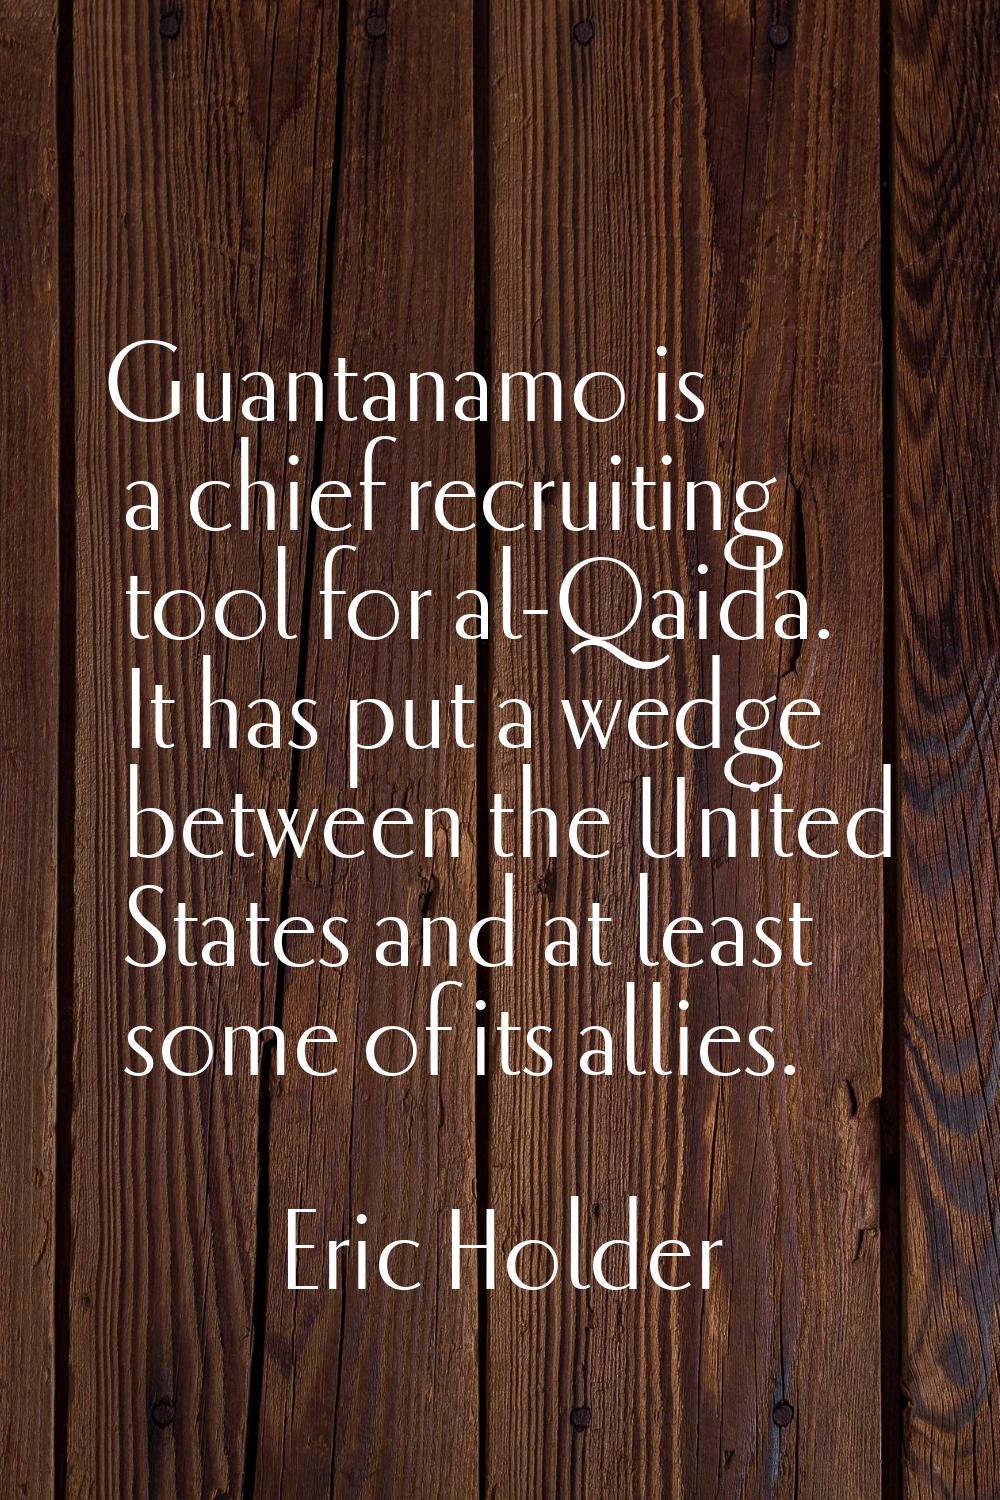 Guantanamo is a chief recruiting tool for al-Qaida. It has put a wedge between the United States an